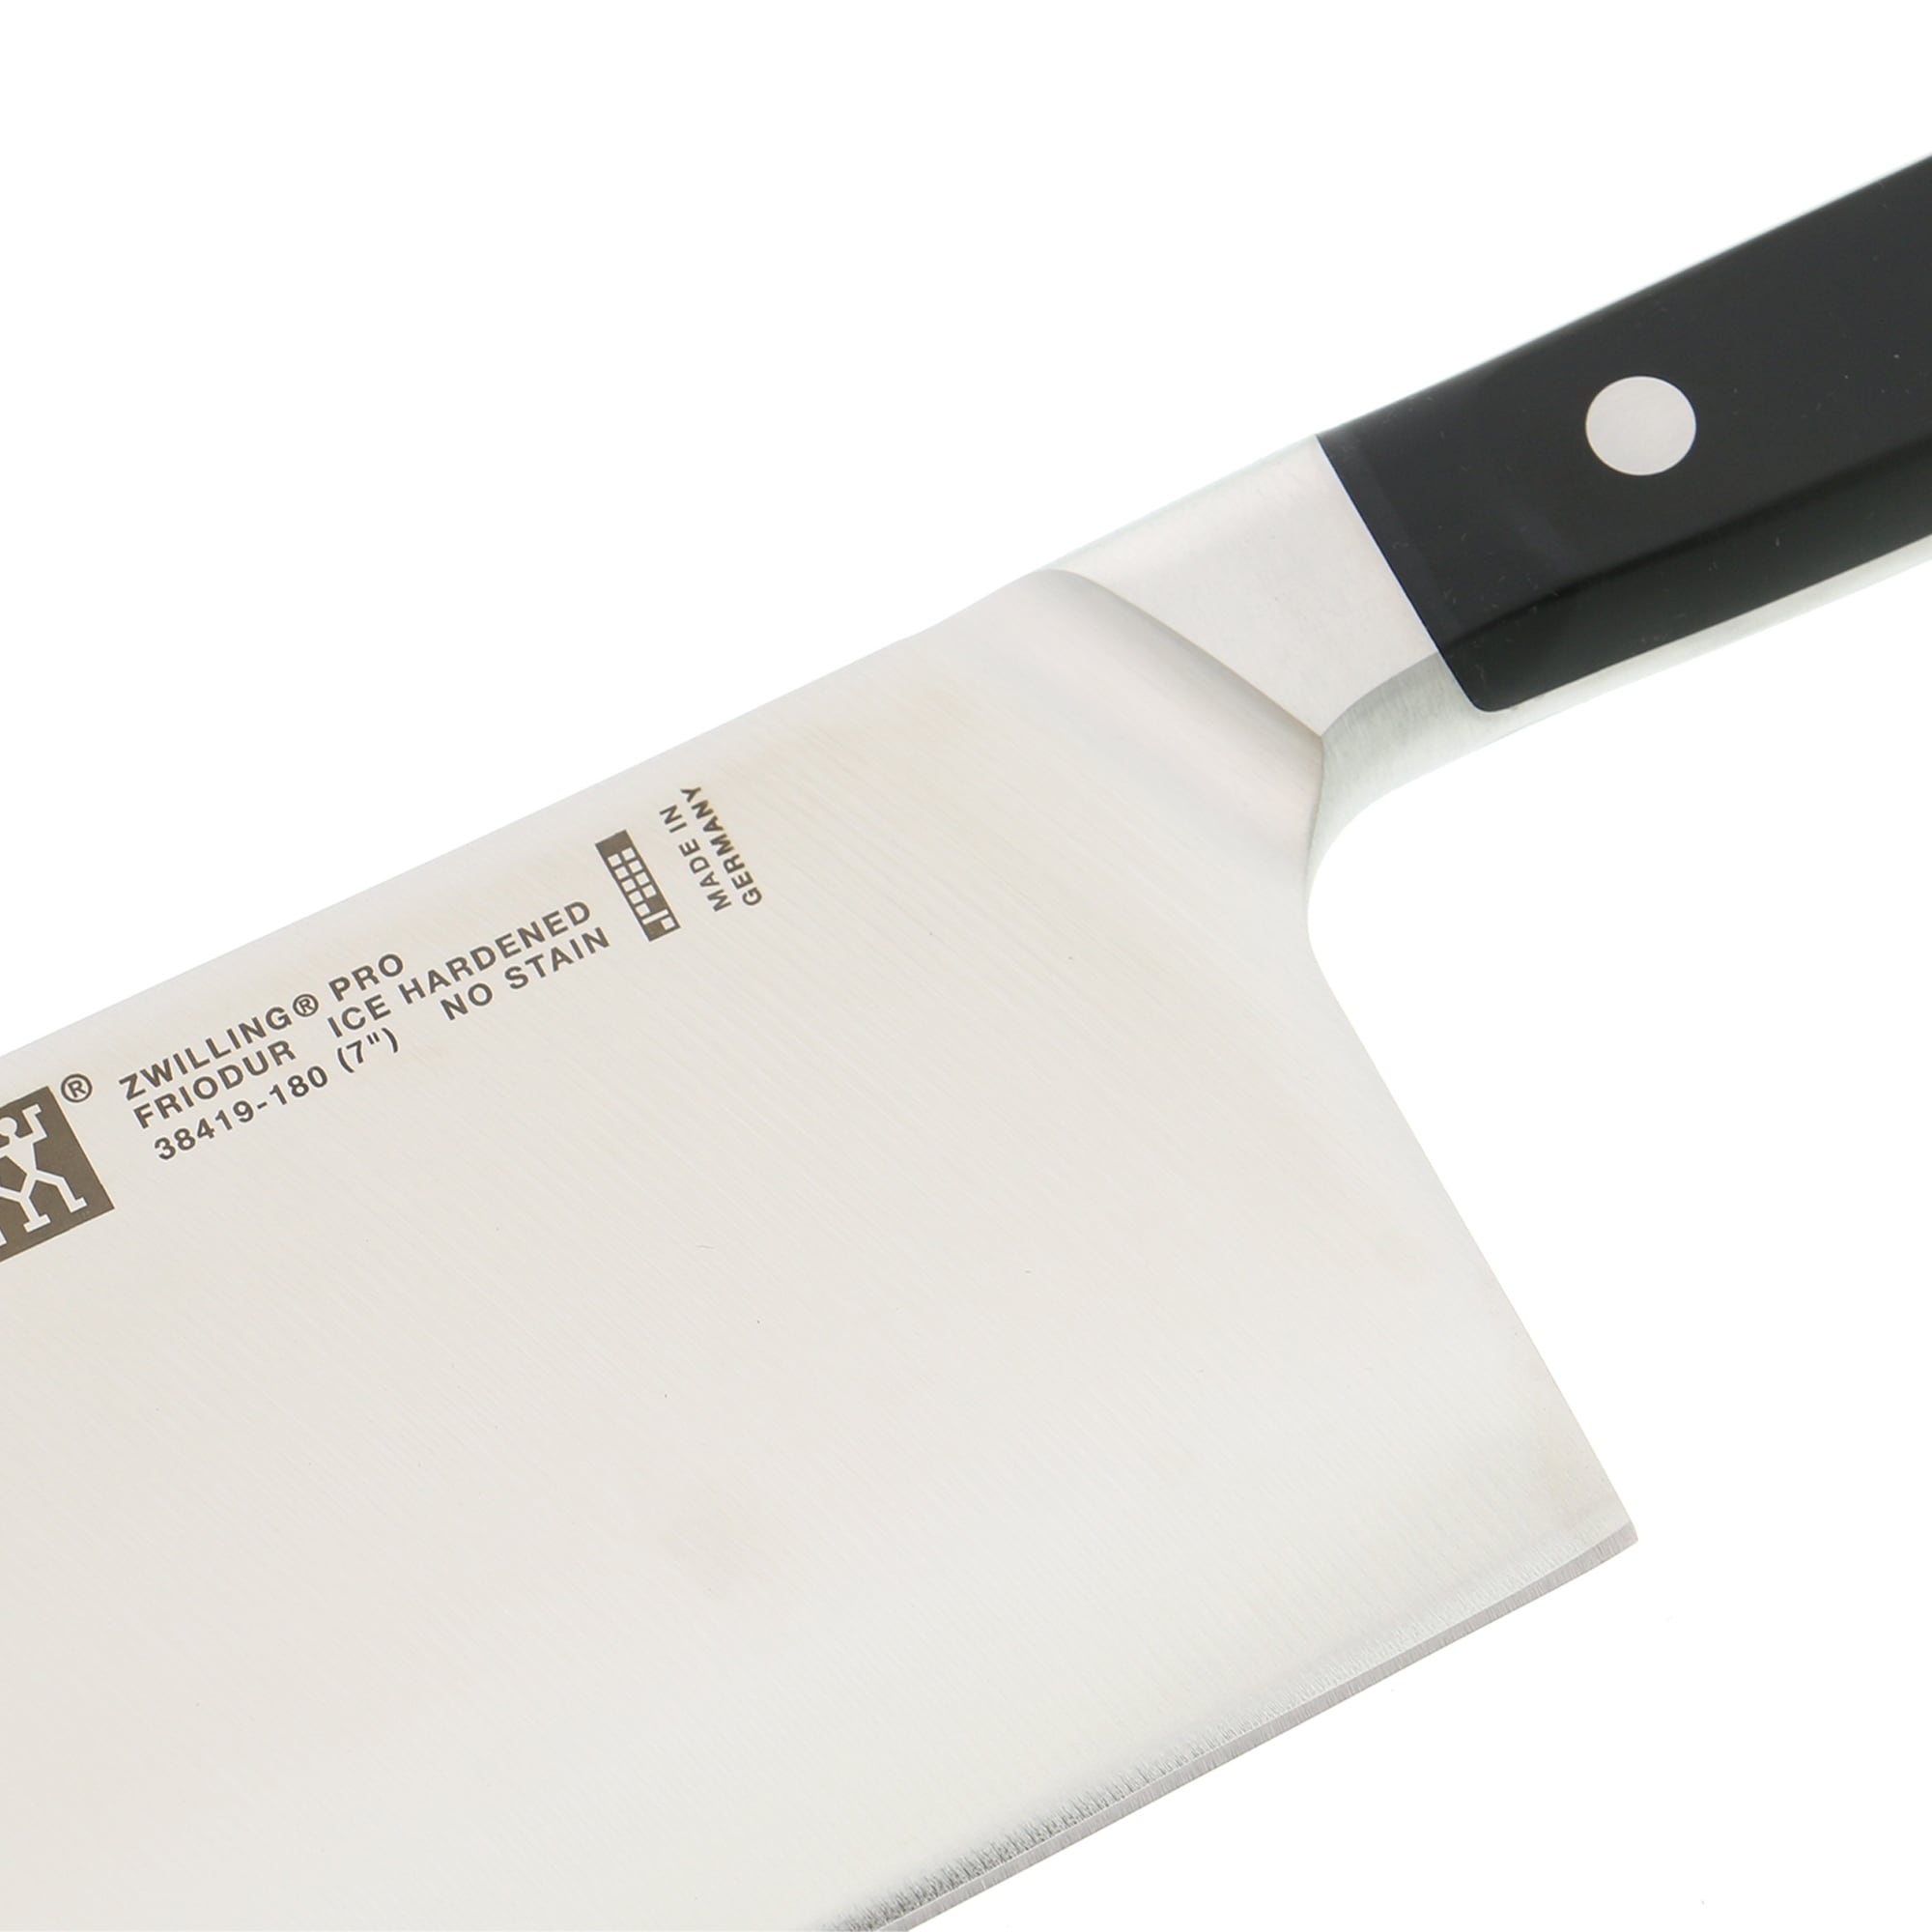 https://ak1.ostkcdn.com/images/products/is/images/direct/112eb5318c7be5c6faad7bc6c10447096d0377e5/ZWILLING-Pro-7-inch-Chinese-Chef%27s-Knife-Vegetable-Cleaver.jpg